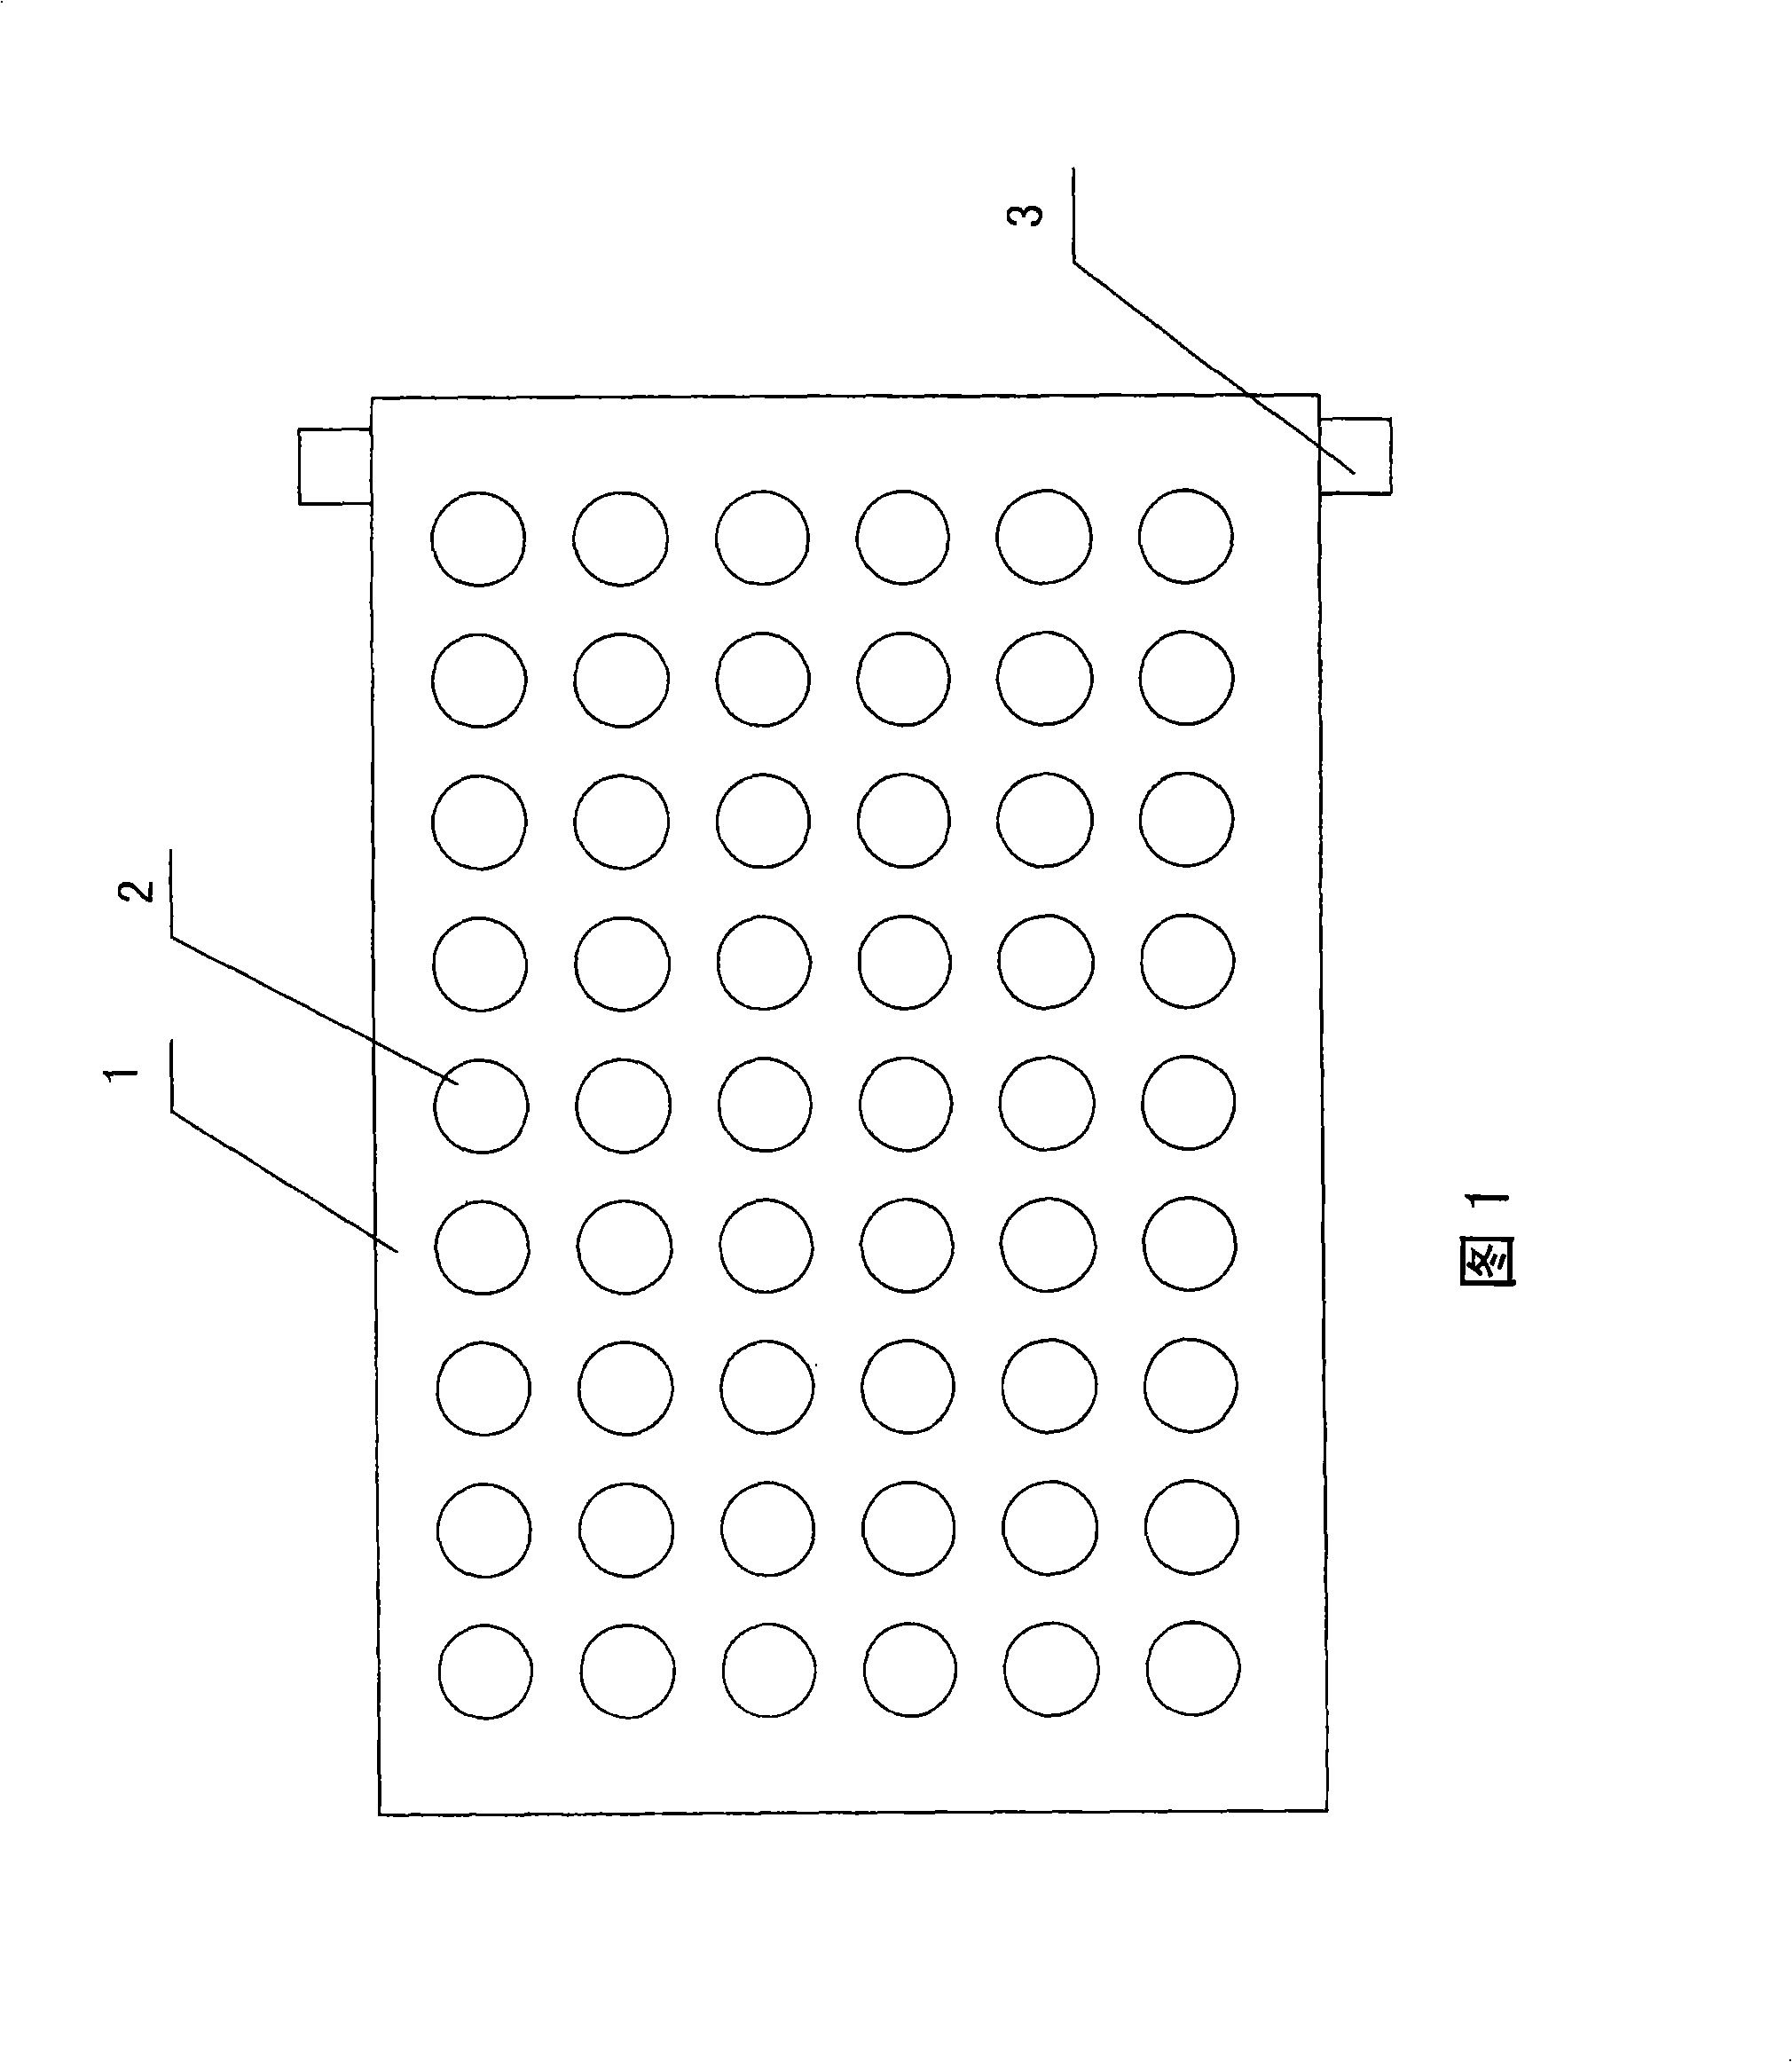 Equivalent sub-energy resource and production method